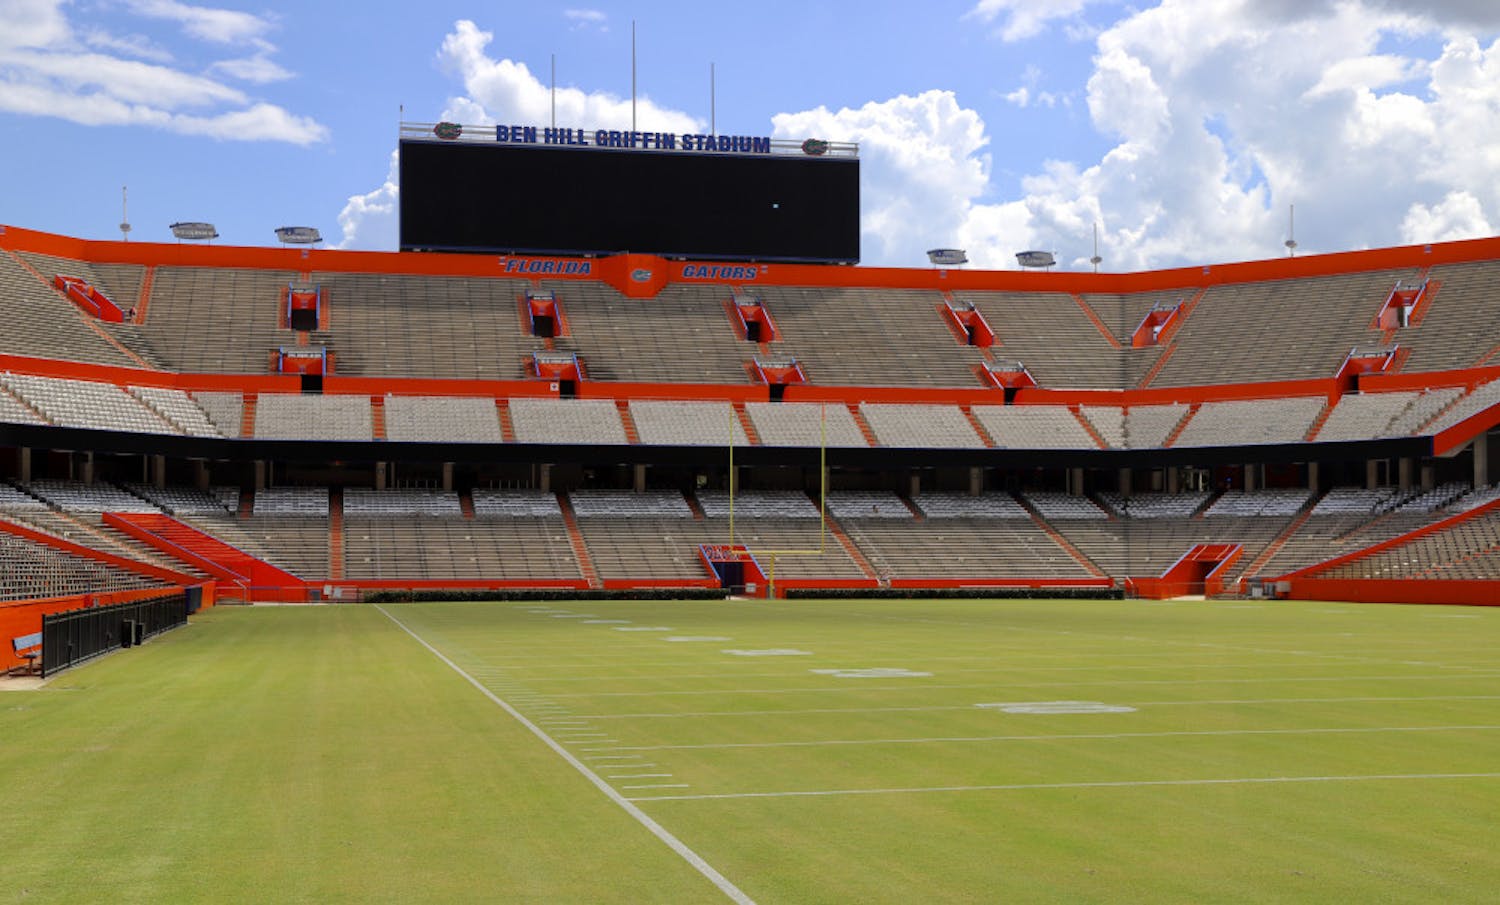 On Saturday, Ben Hill Griffin Stadium will house 2,000 students, among other fans, for the Gators' season opener. The UF chapter of Young Americans for Freedom plans to say the Gator Bait chant, despite the university's banning of the phrase at sporting events.